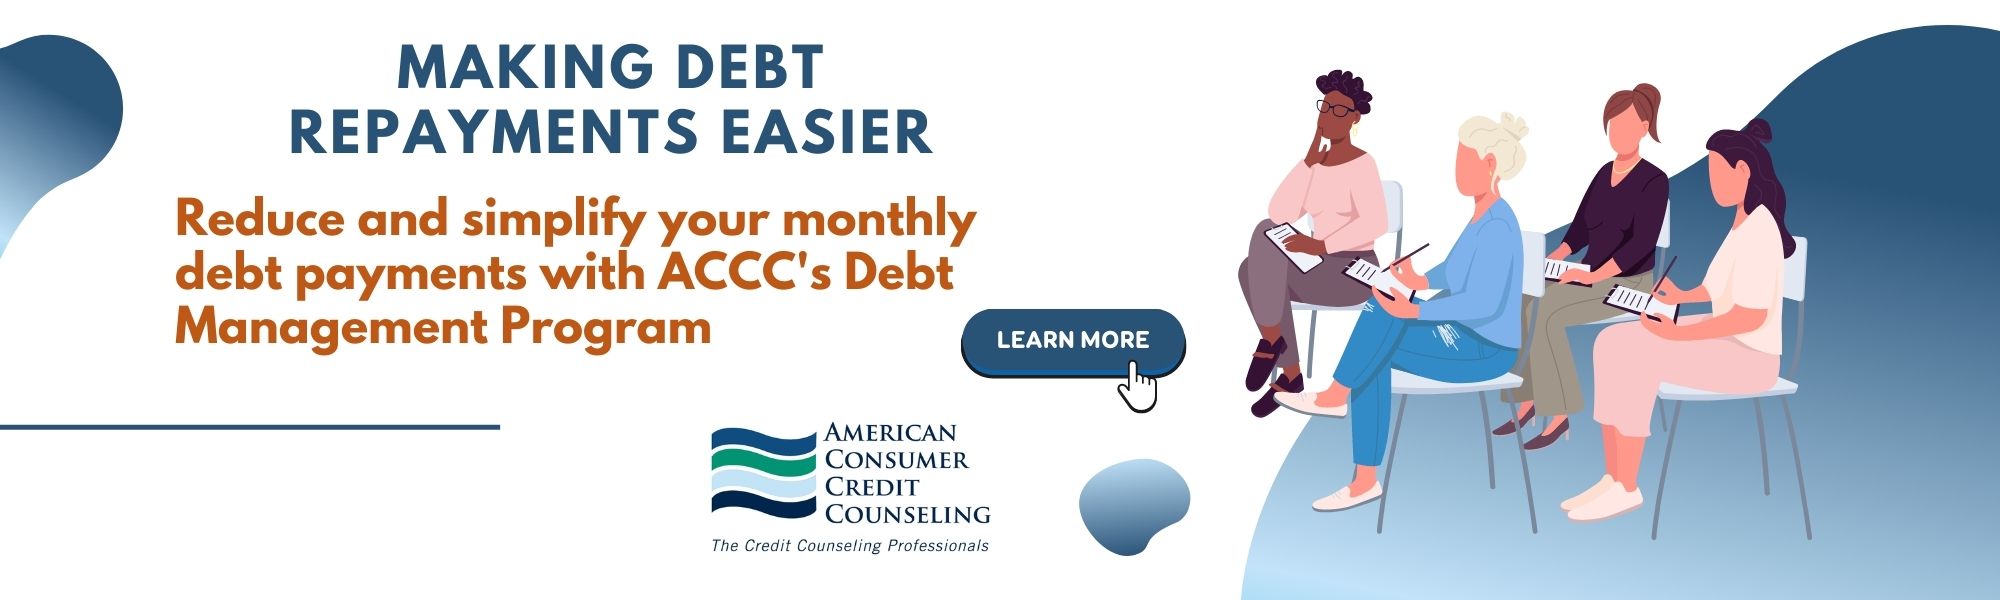 American Consumer Credit Counseling's Debt Management programs help reduce and simplify your monthly debt payments